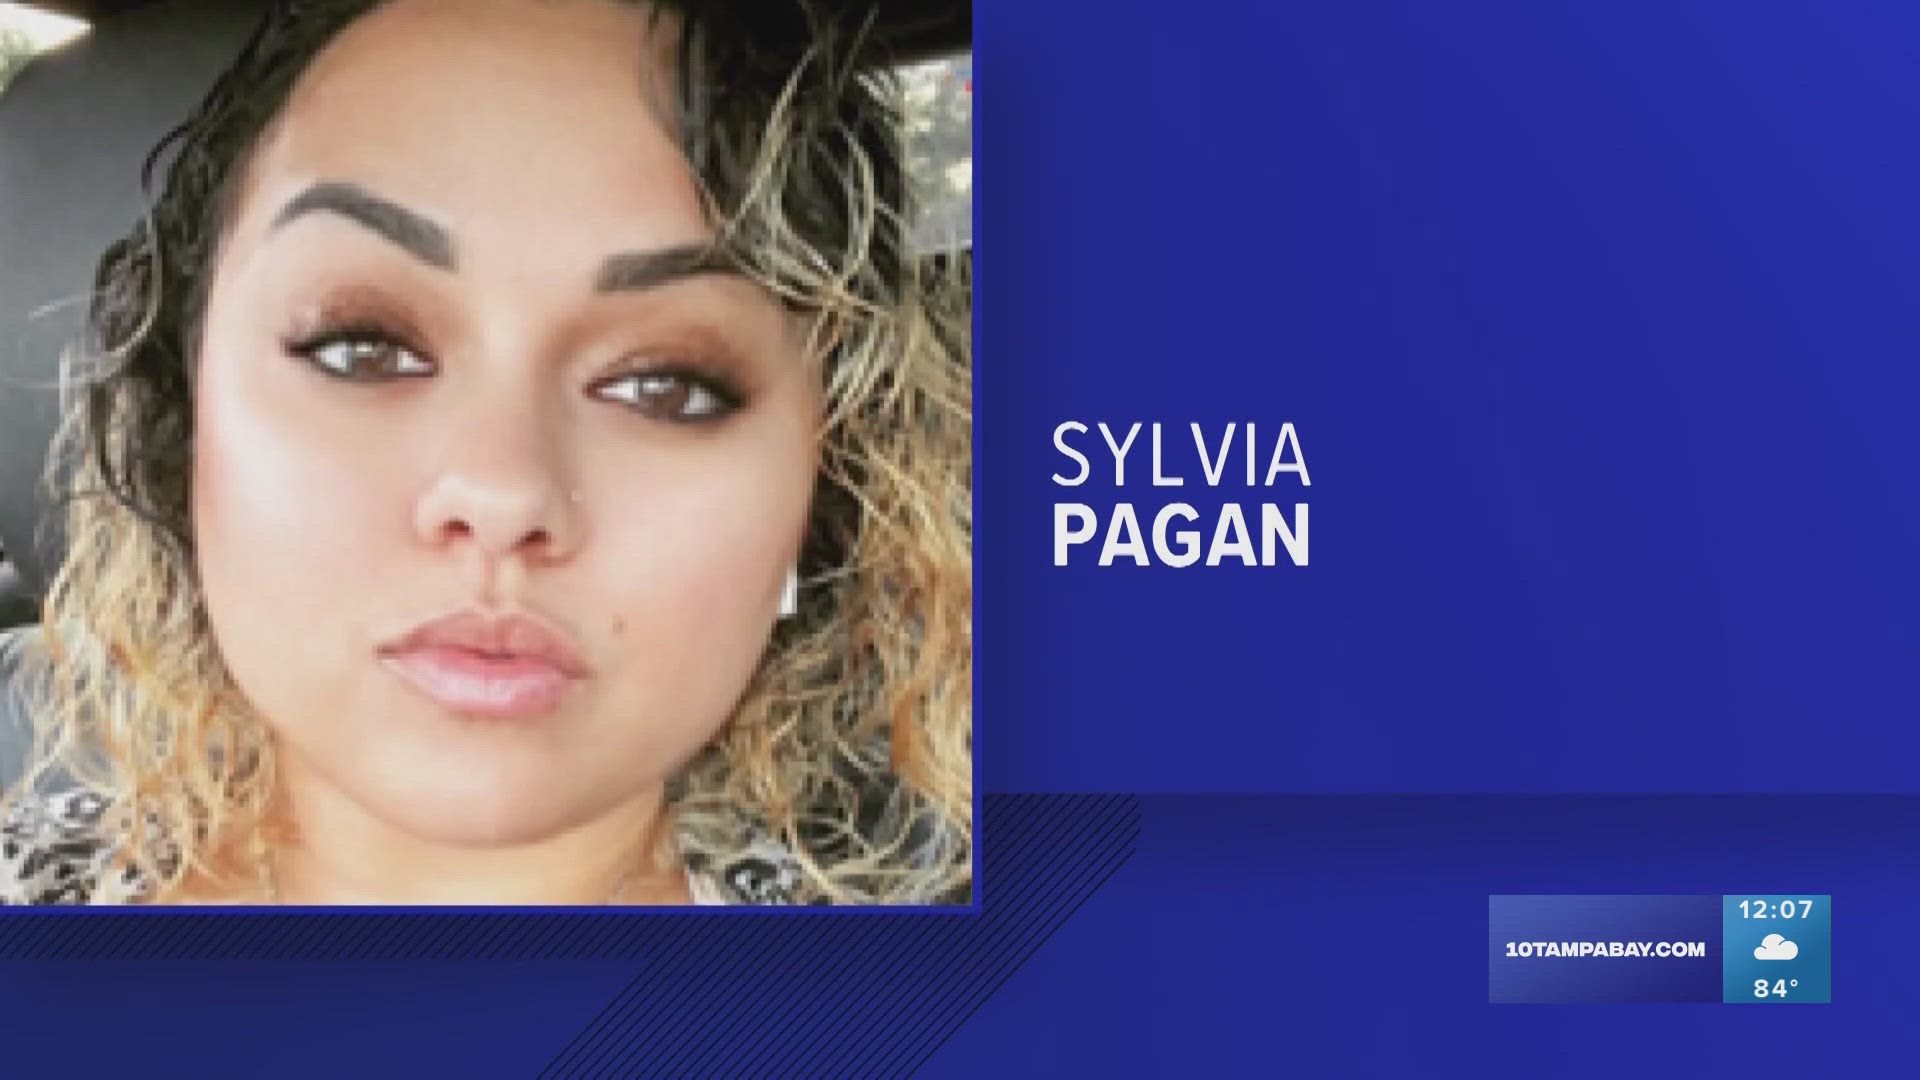 If you know anything about where Sylvia Pagan may be, call the Tampa Police Department or report it anonymously to Crime Stoppers.